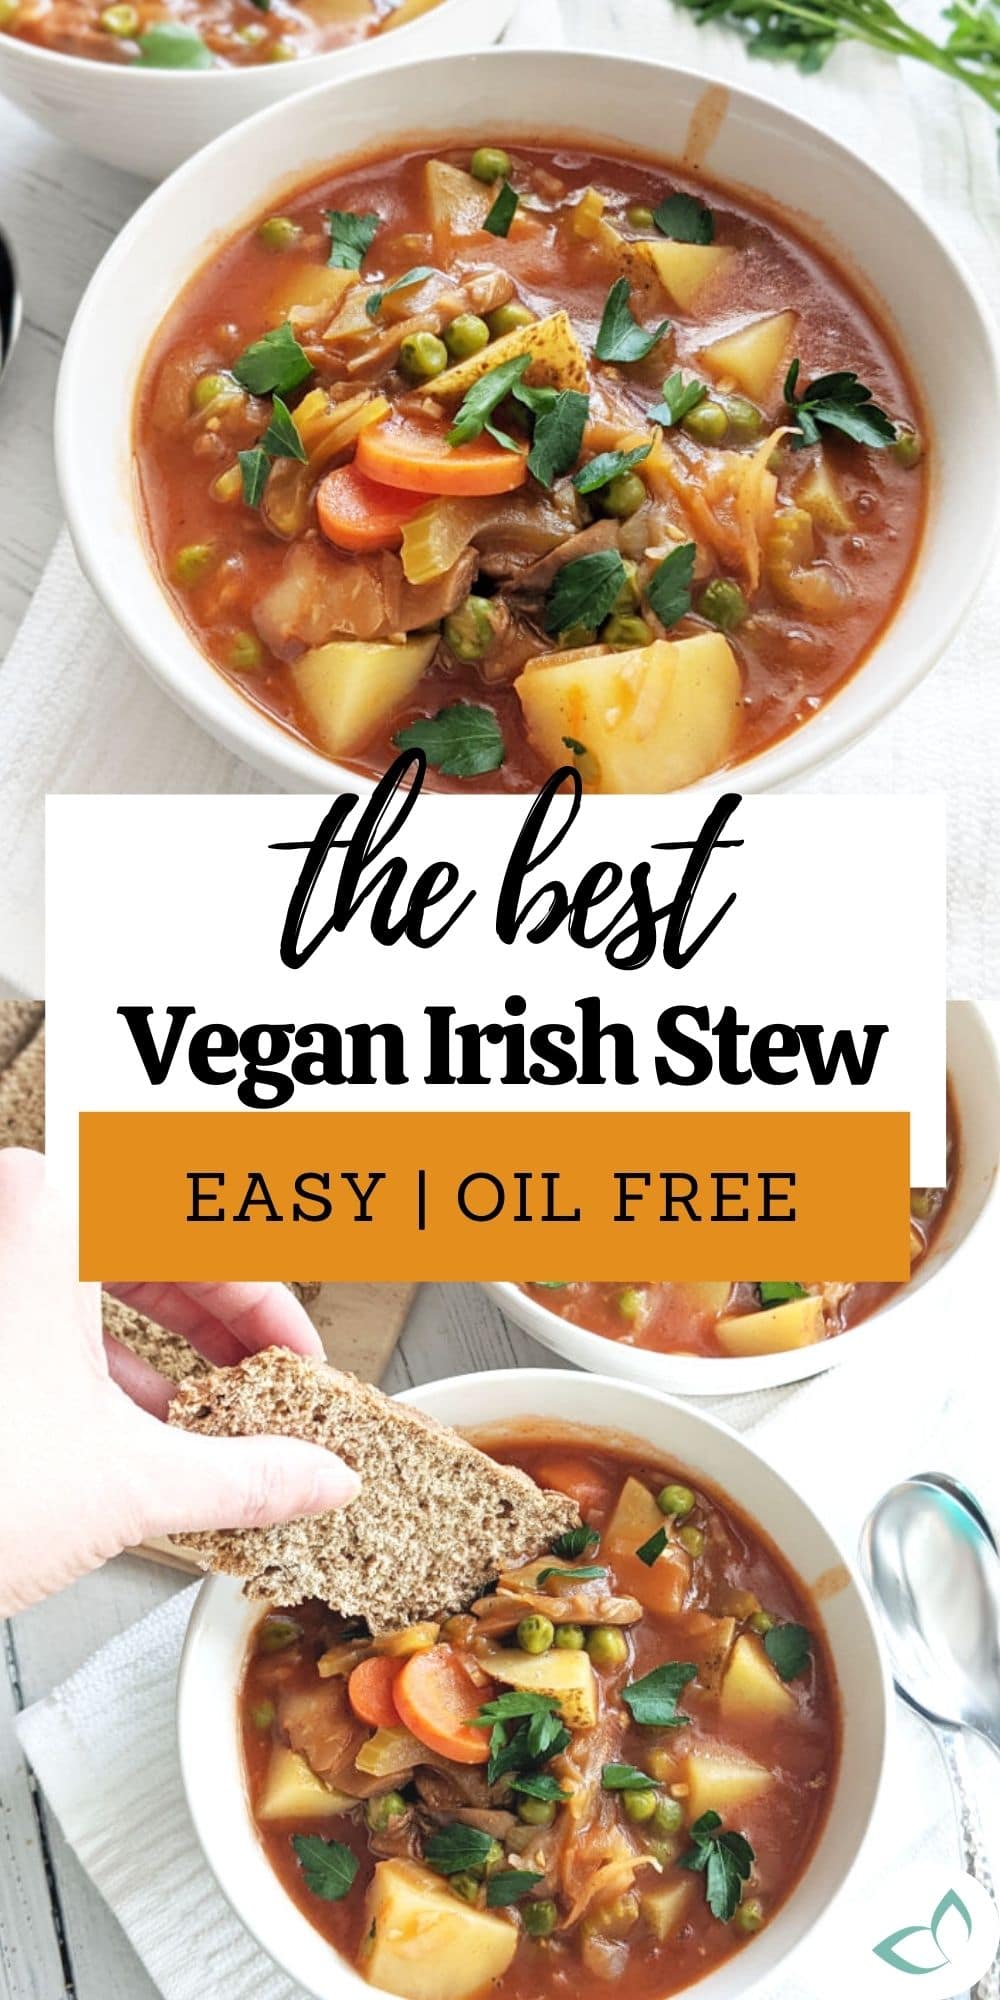 Bowls of vegetable stew with text overlay "the best vegan Irish stew easy oil free."